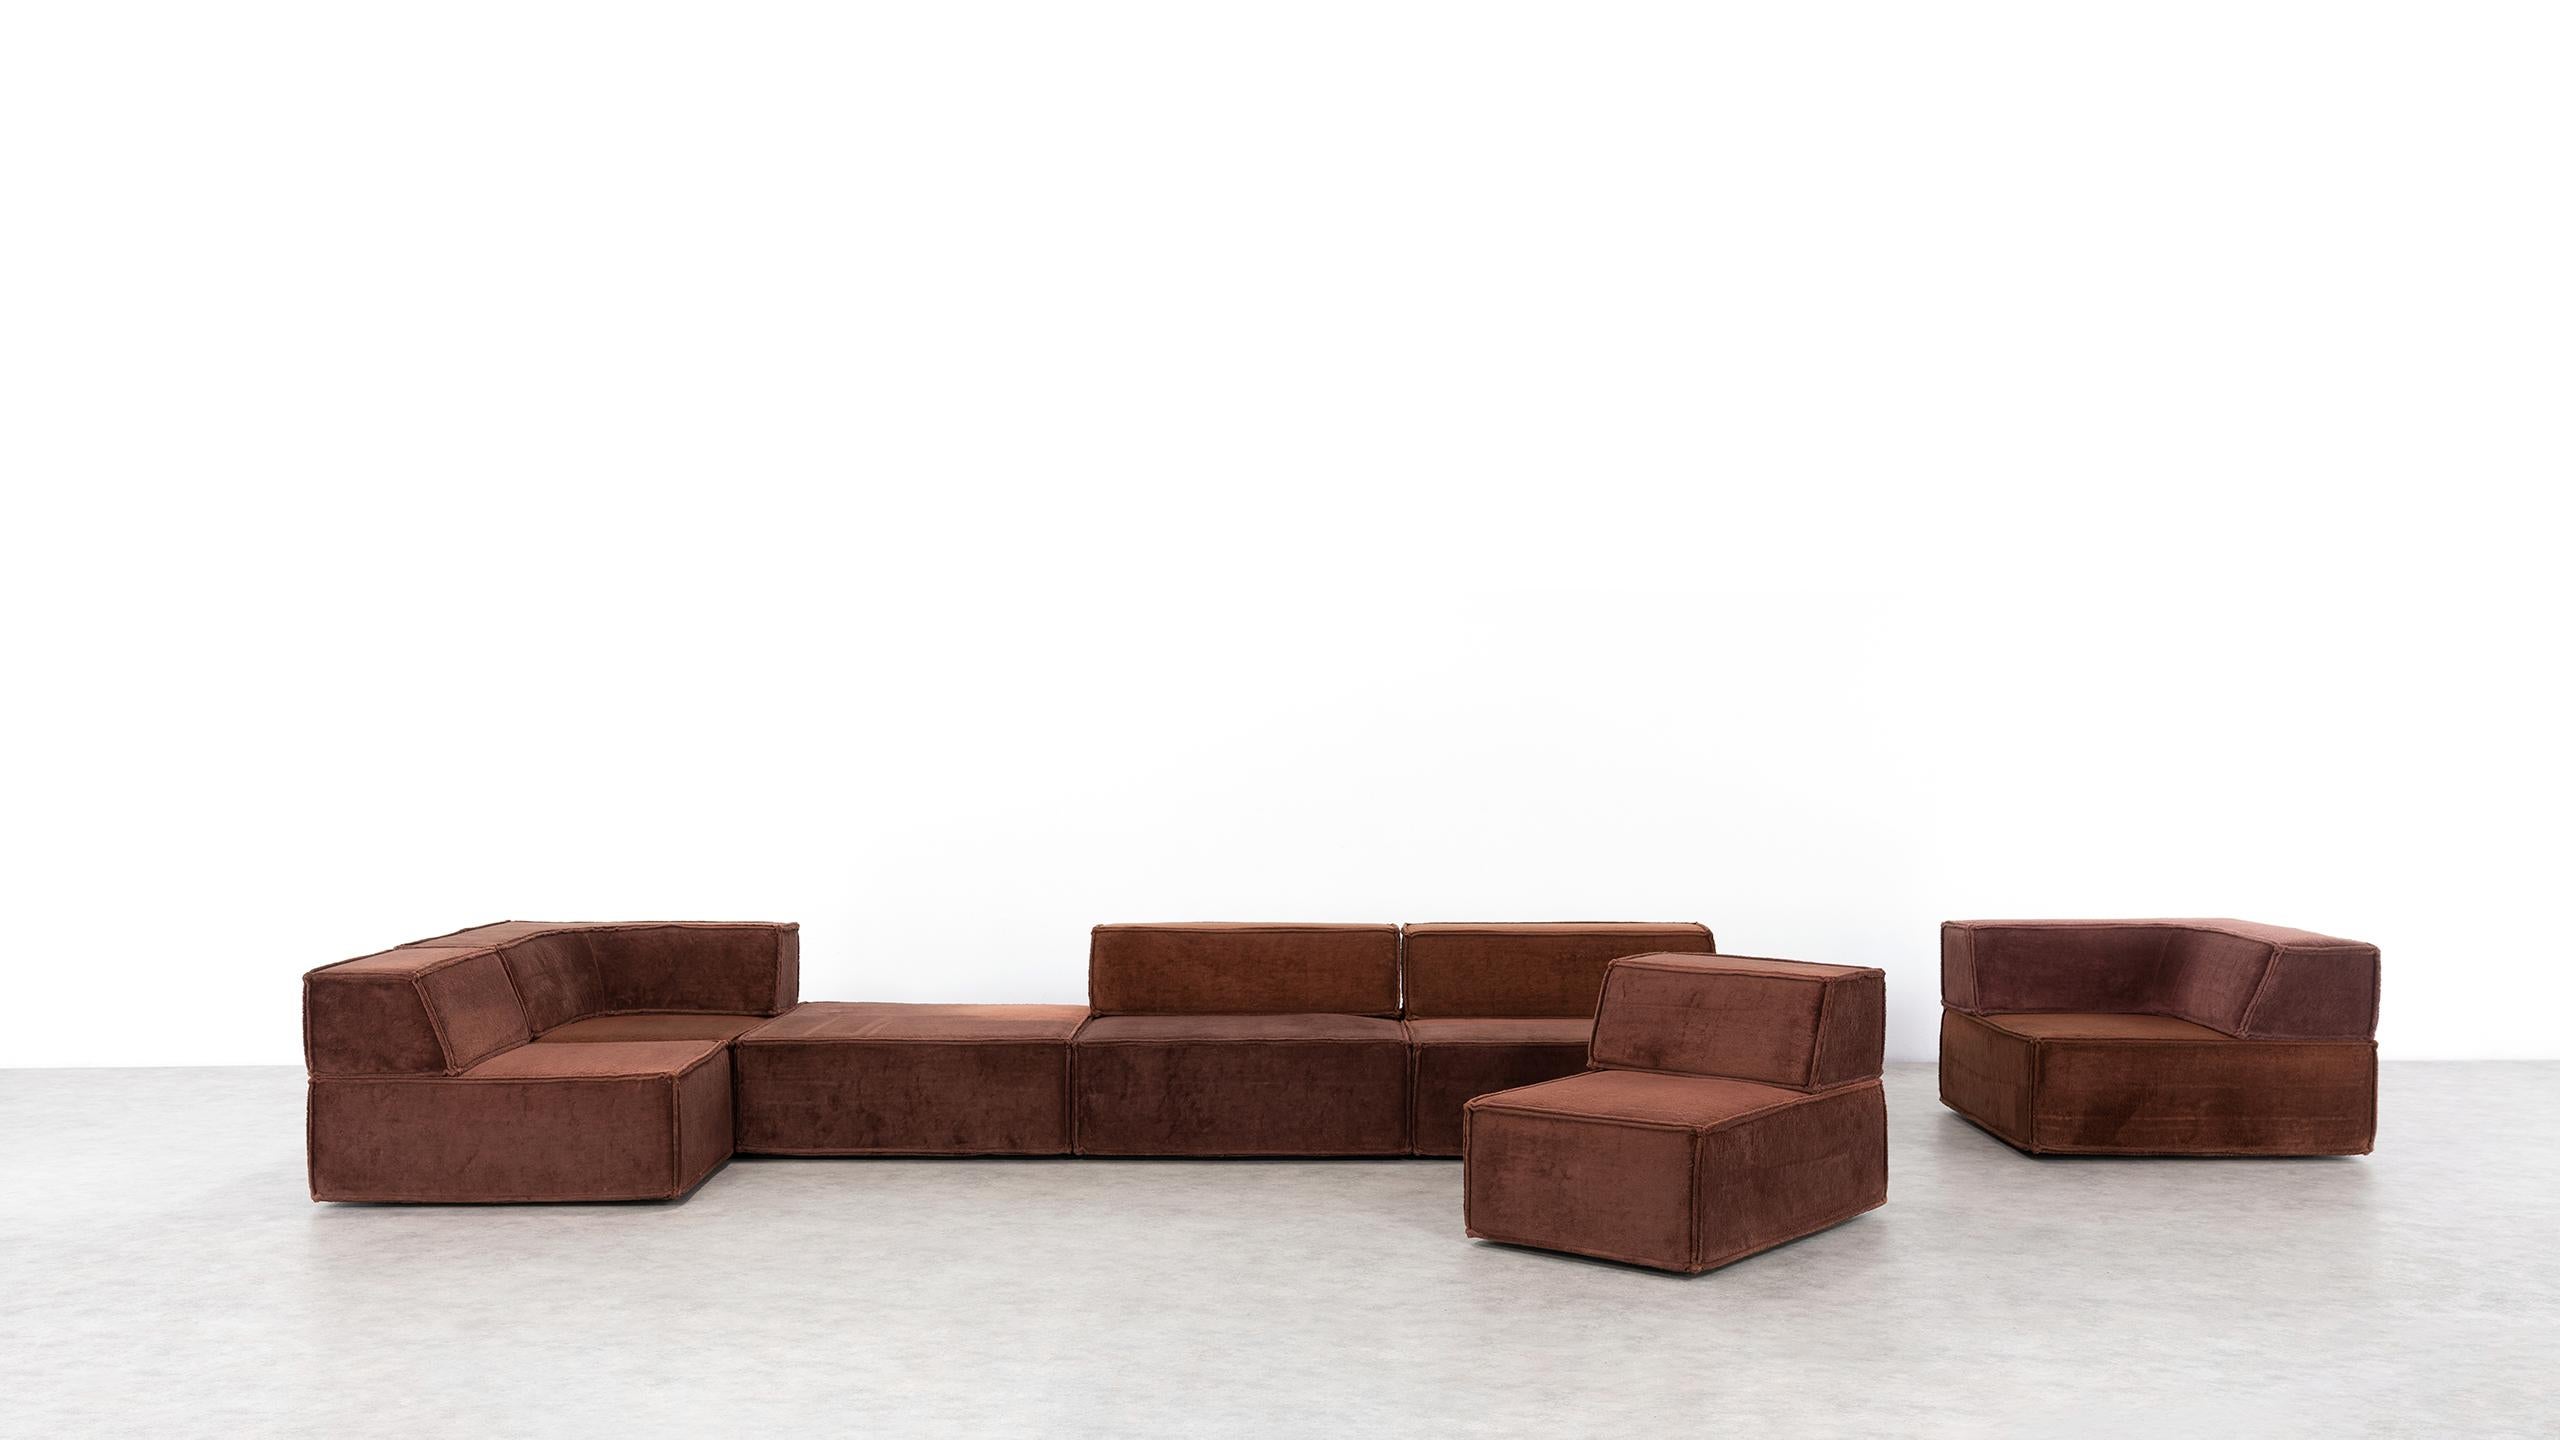 COR Trio Modular Sofa, Giant Landscape in Chocolate Brown, 1972 by Team Form AG 2